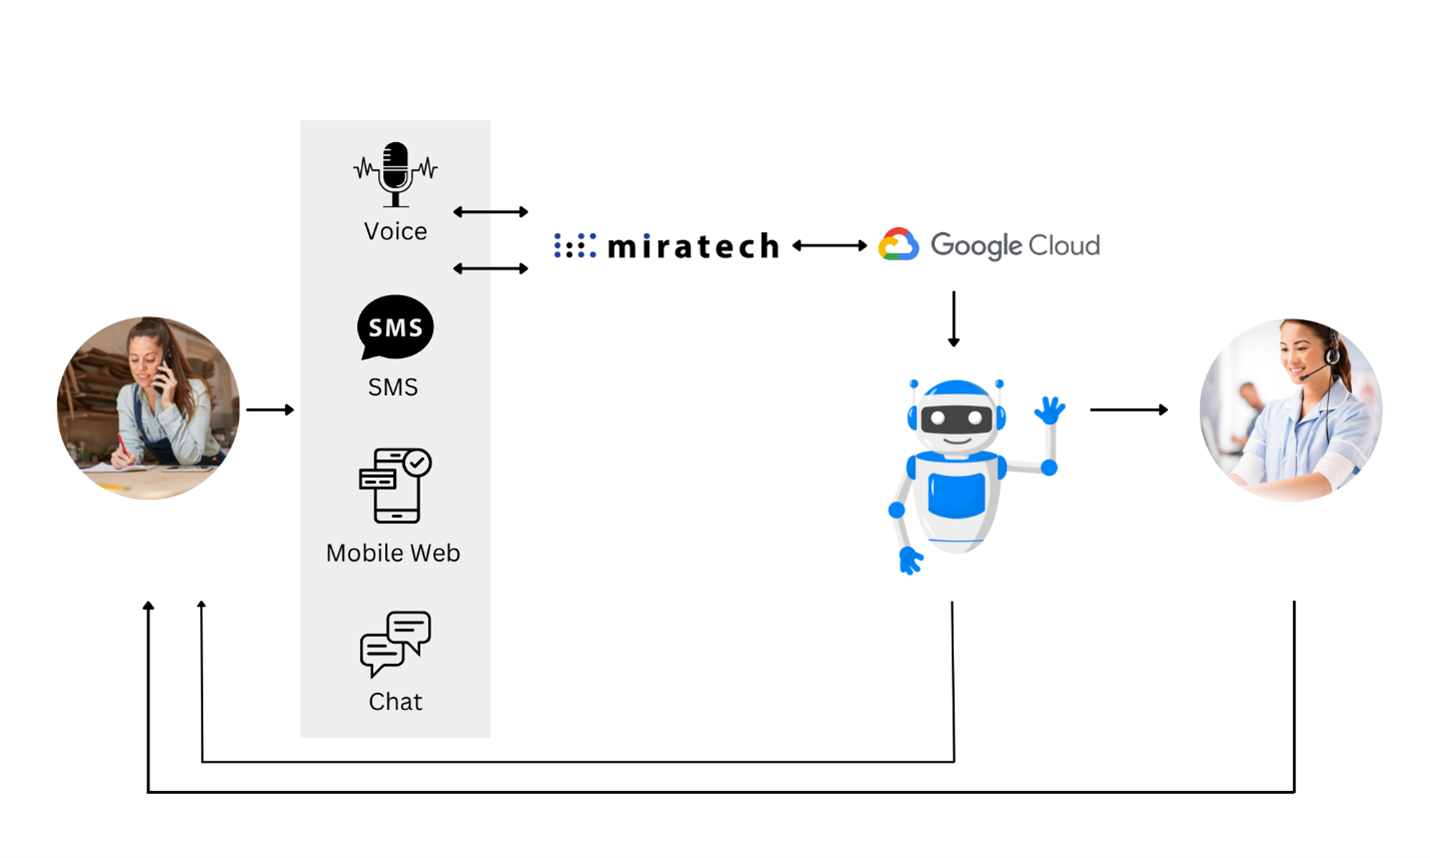 Diagram of Miratech and Google